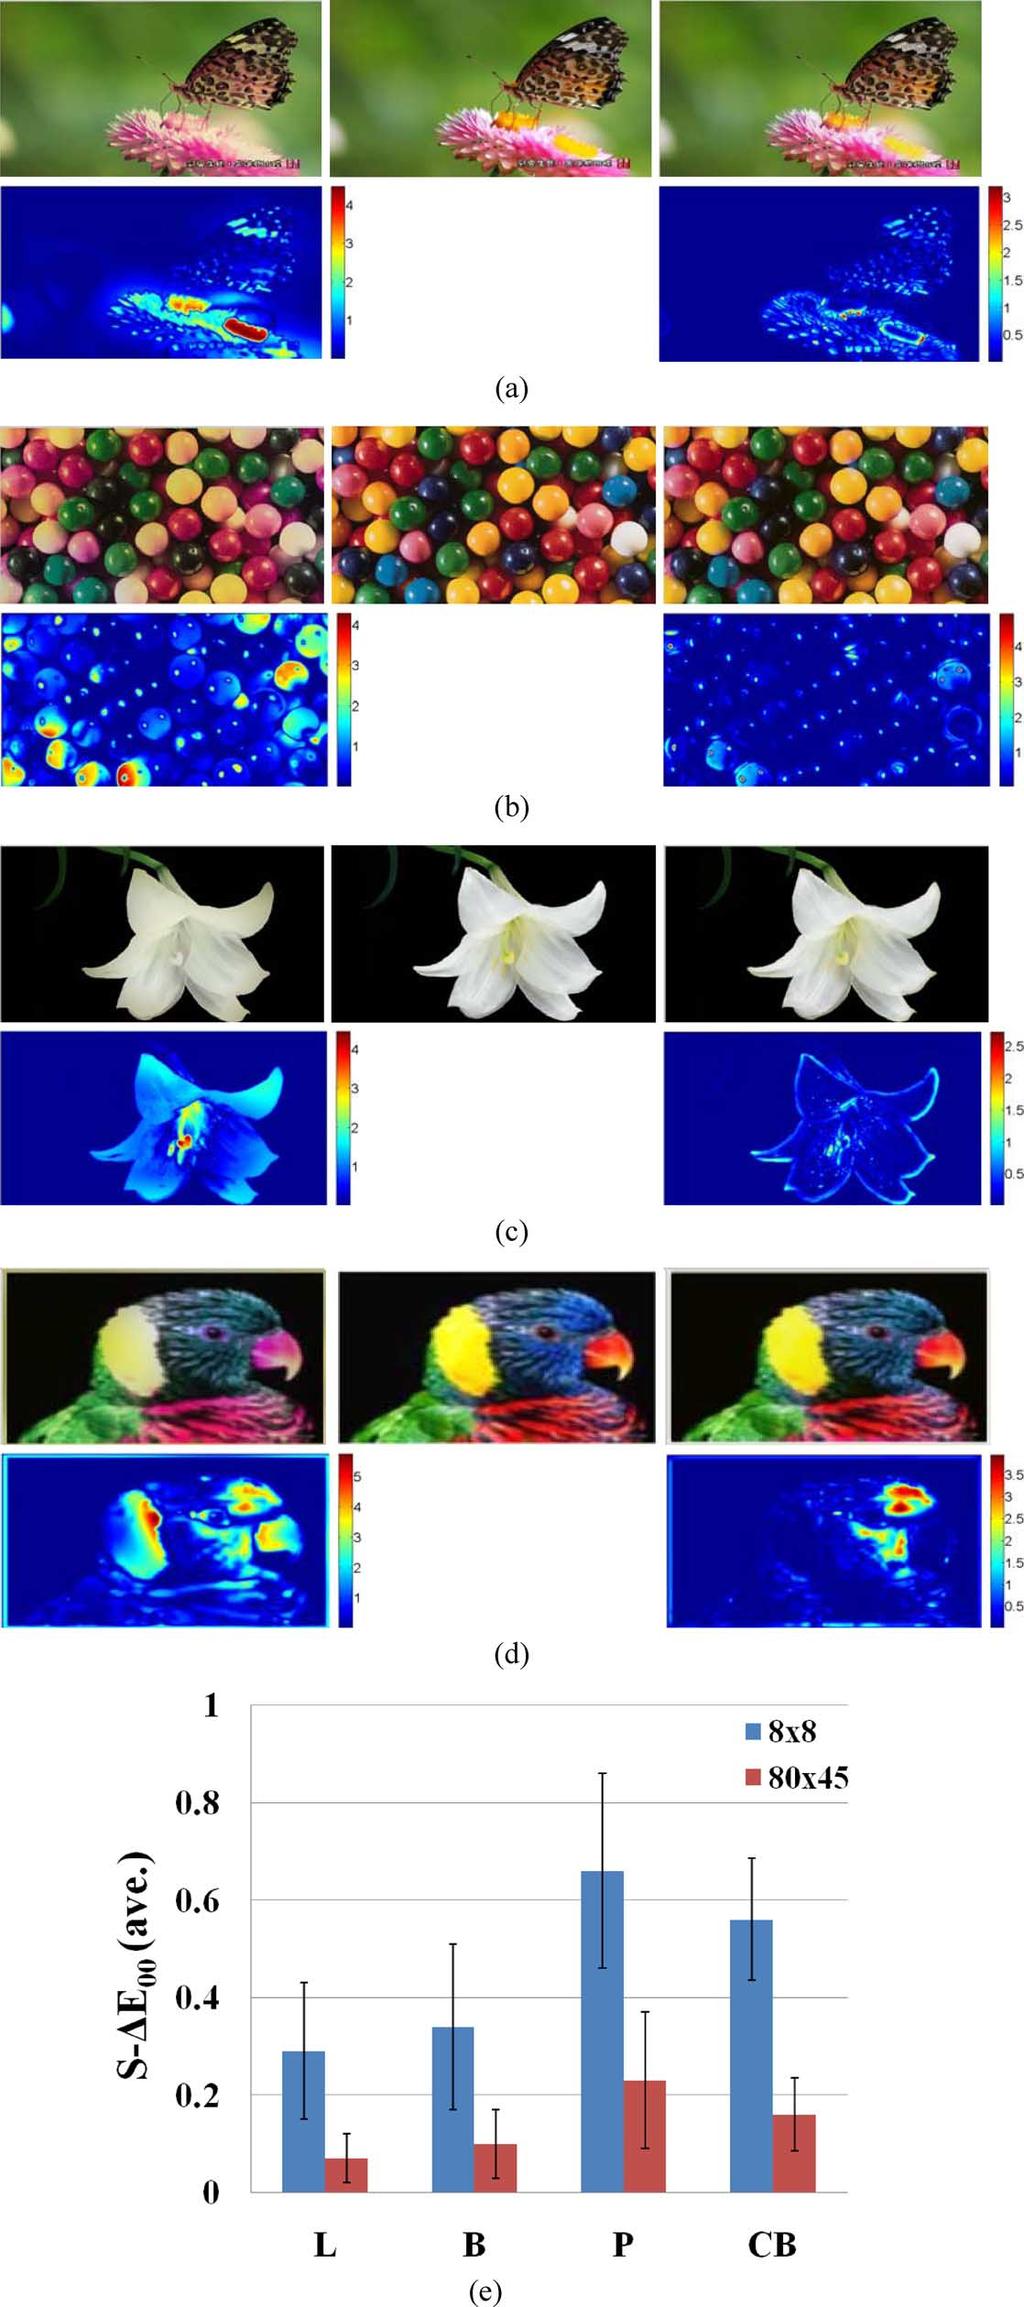 CHENG et al.: TWO-FIELD SCHEME: SPATIOTEMPORAL MODULATION FOR FSC LCDs 389 Fig. 8. (a) The apparatus of capturing CBU image by a high-speed camera moving horizontally.